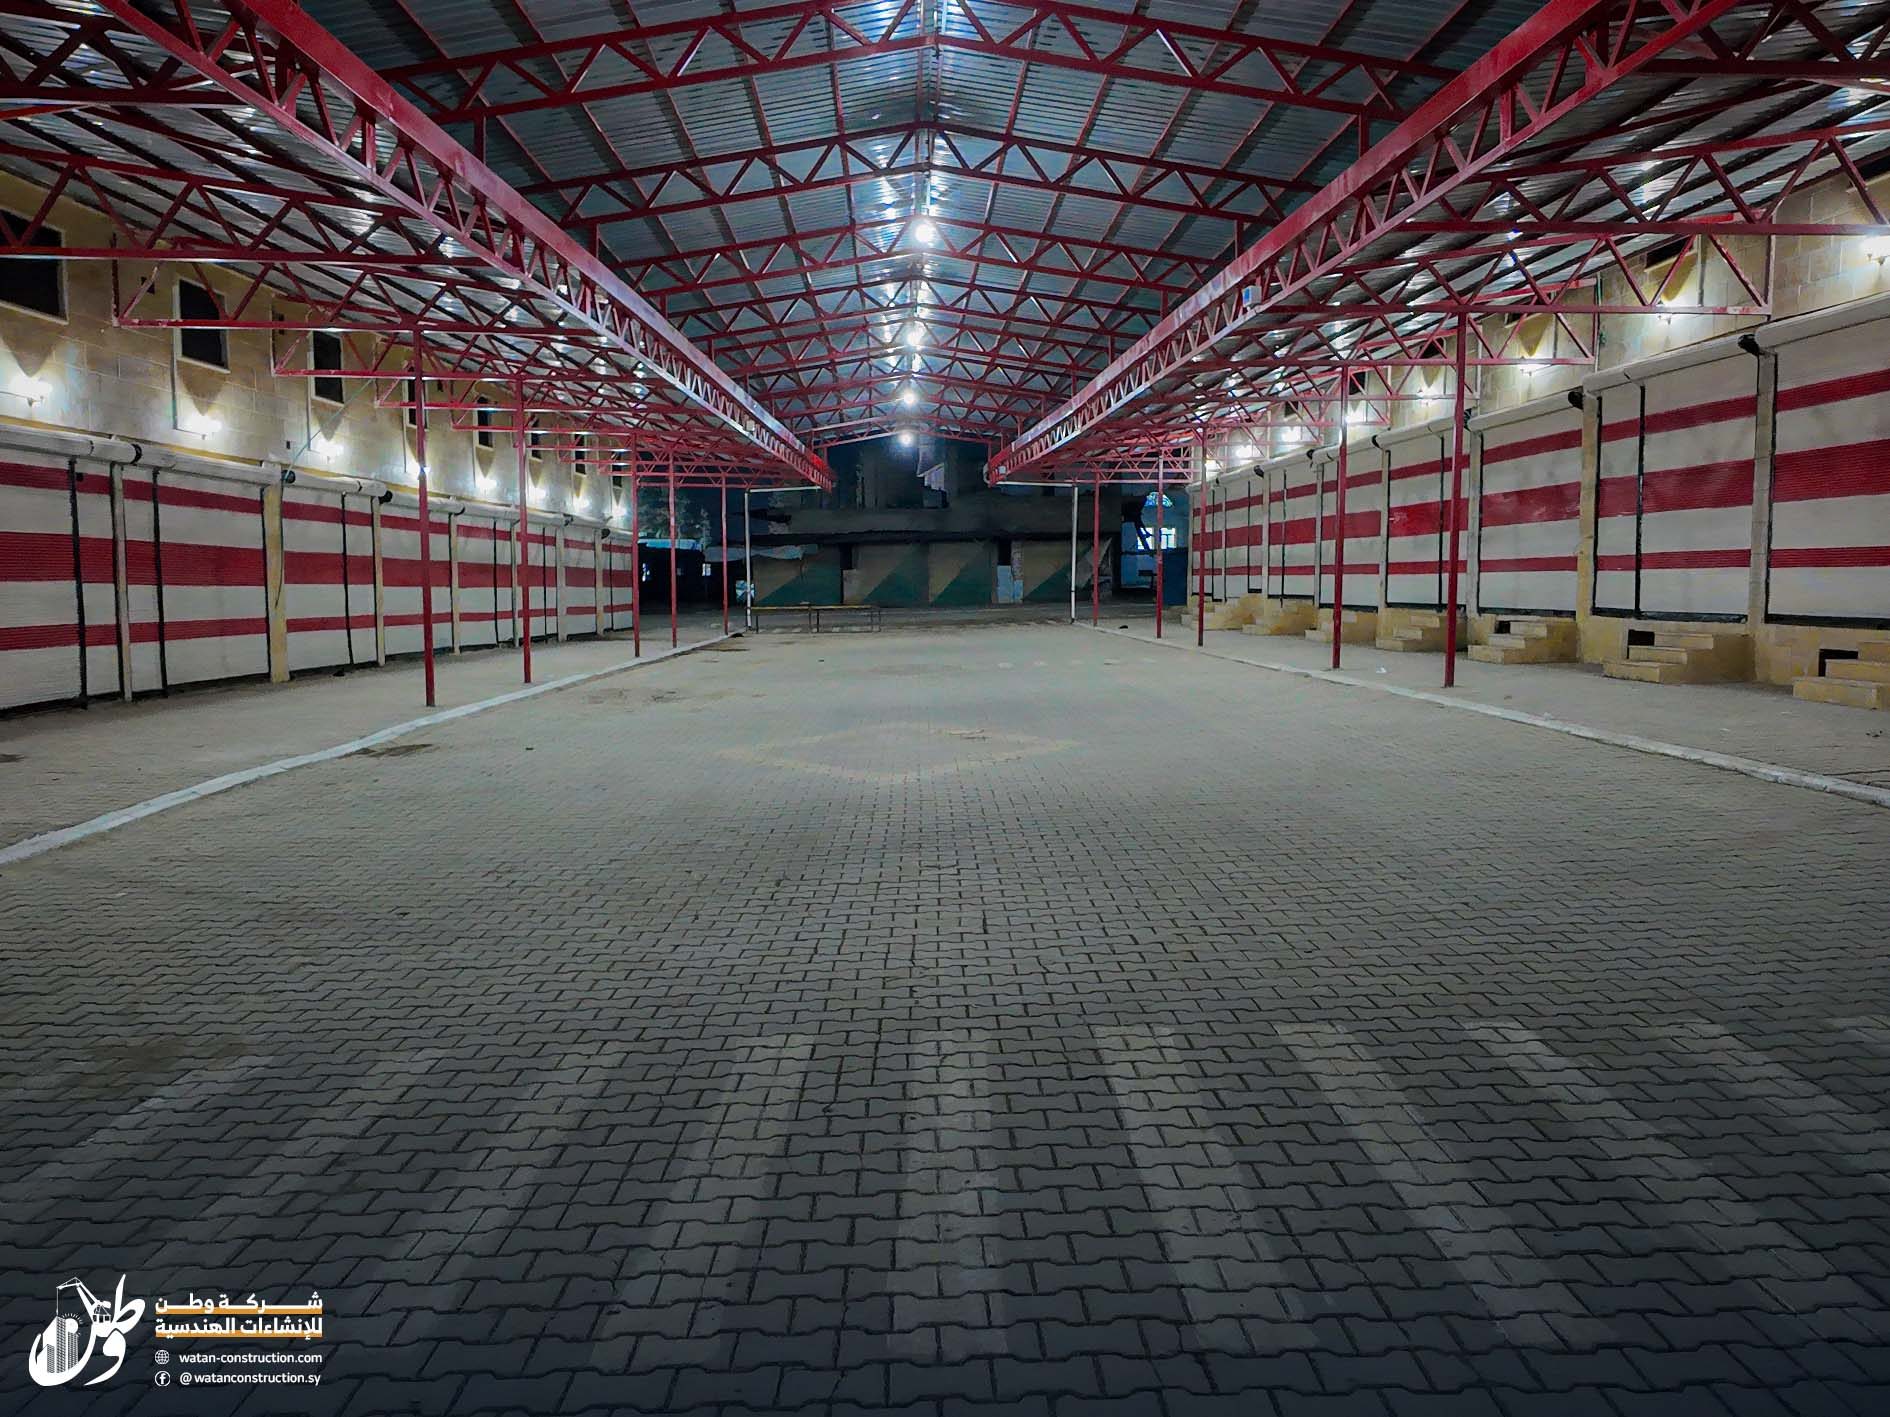 Night photos of the oil and grain market in Afrin2